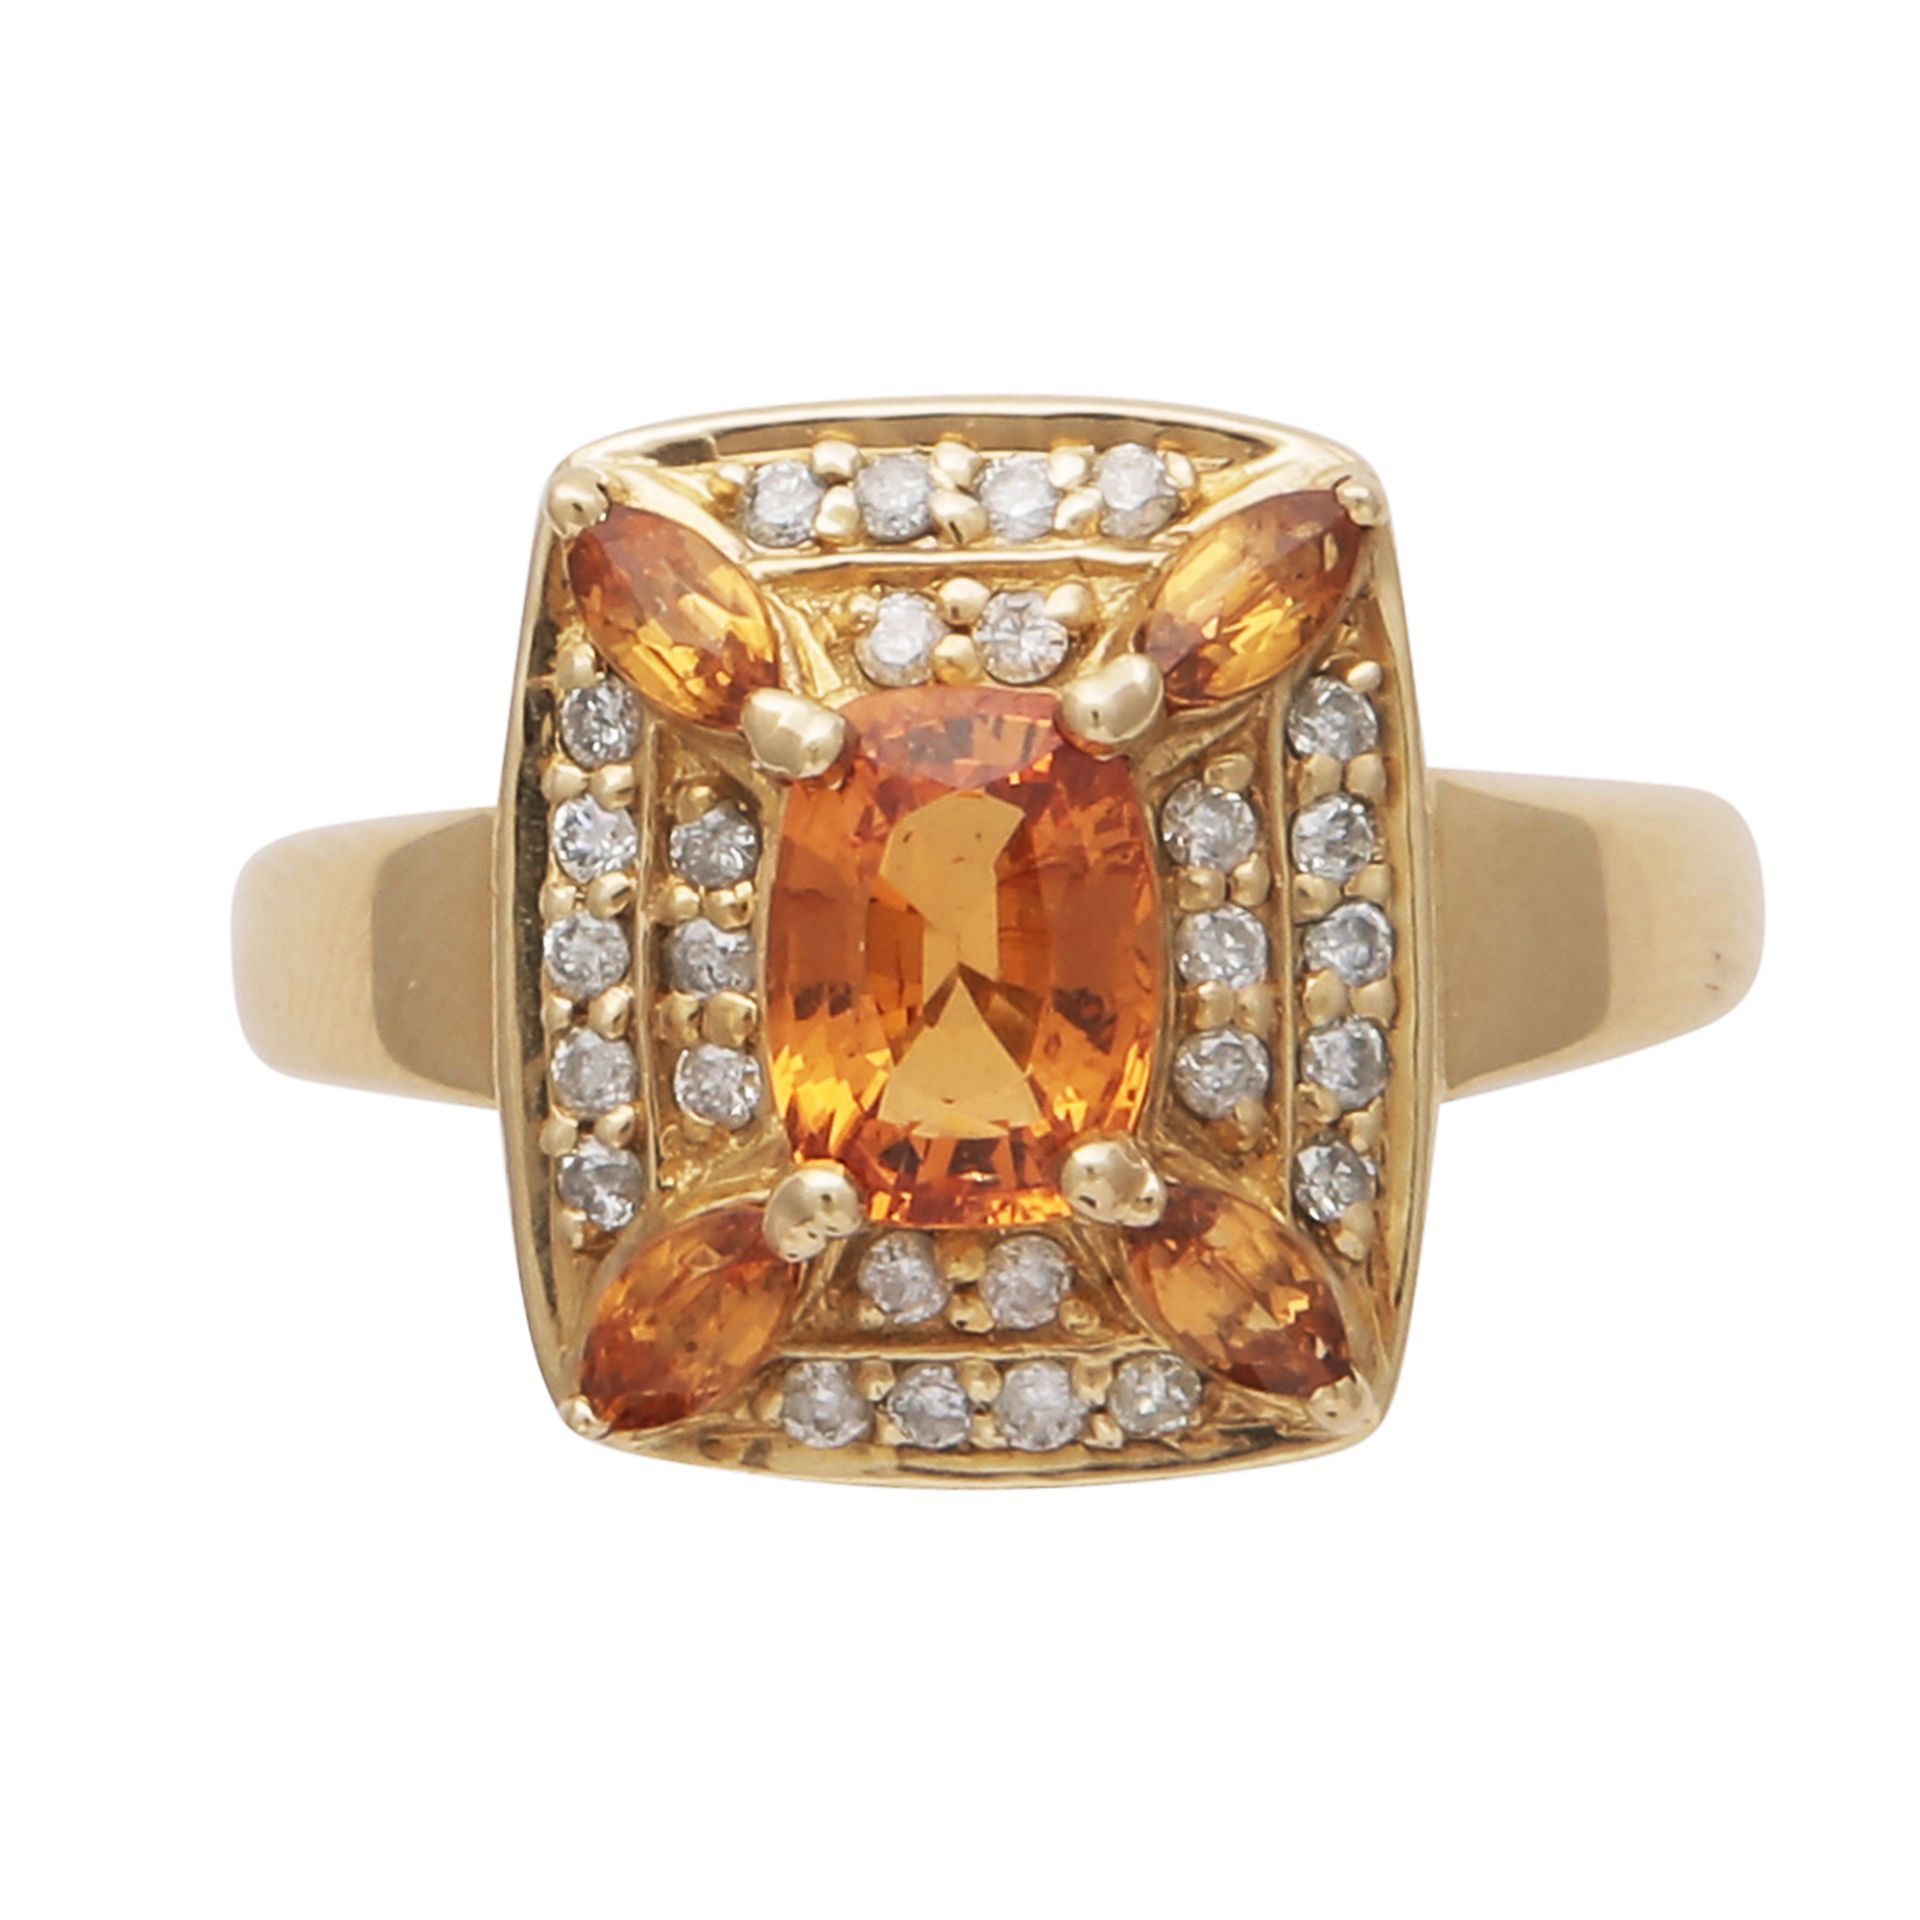 A citrine and diamond dress ring in 14ct yellow gold, the square face set with an arrangement of one